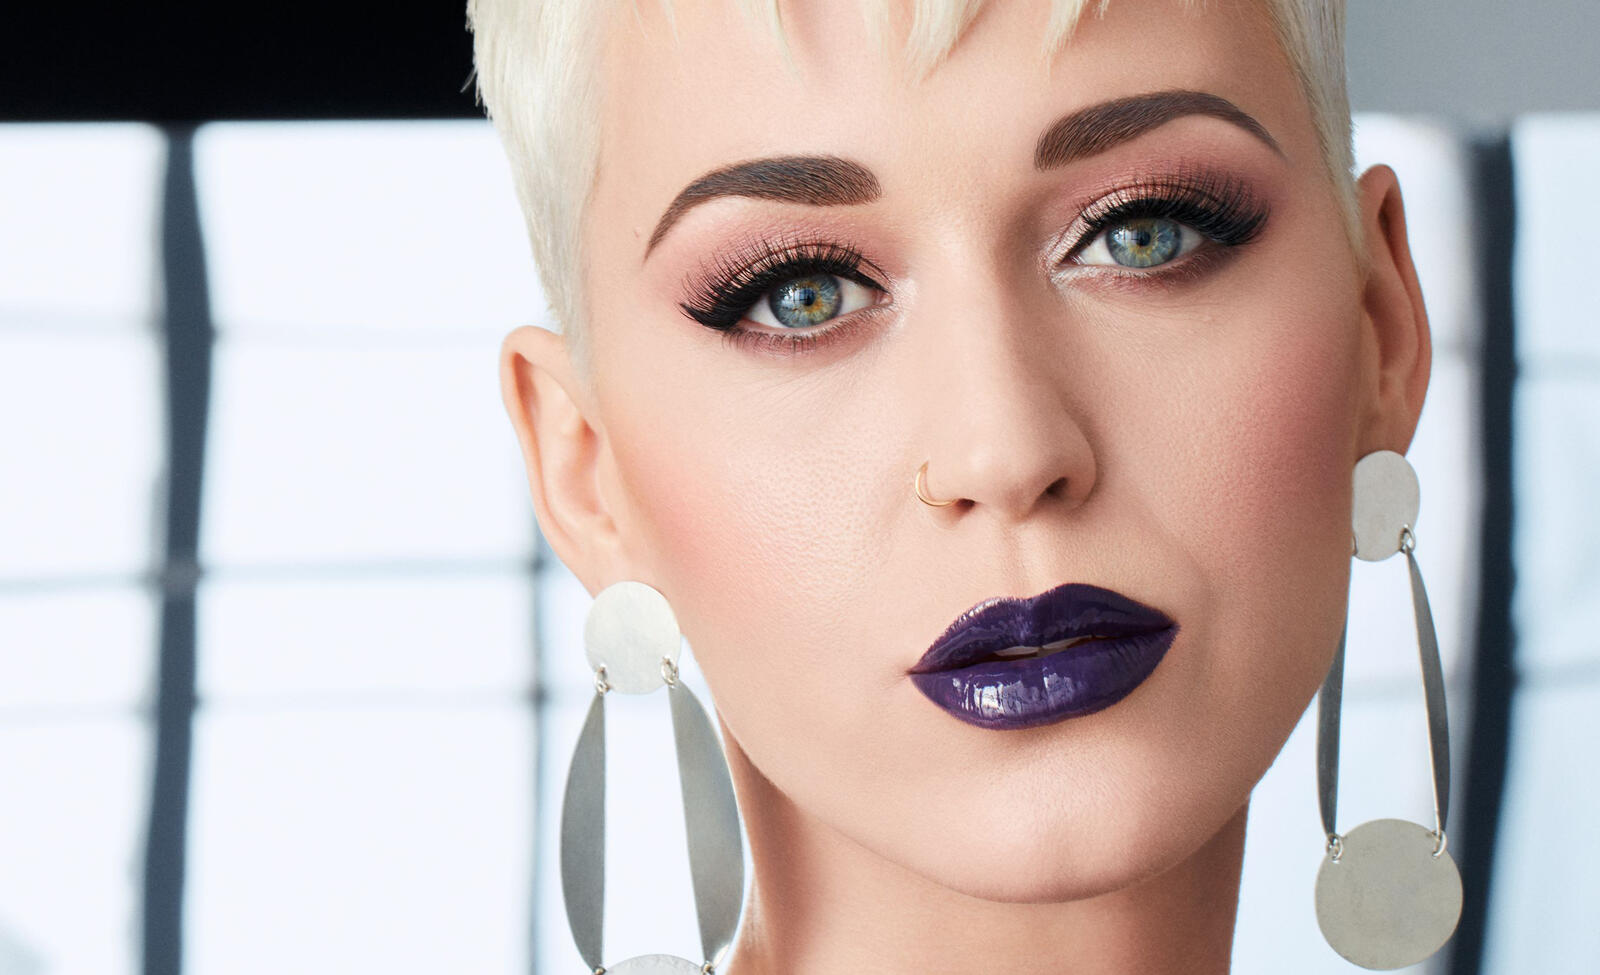 Wallpapers Katy Perry girl face on the desktop